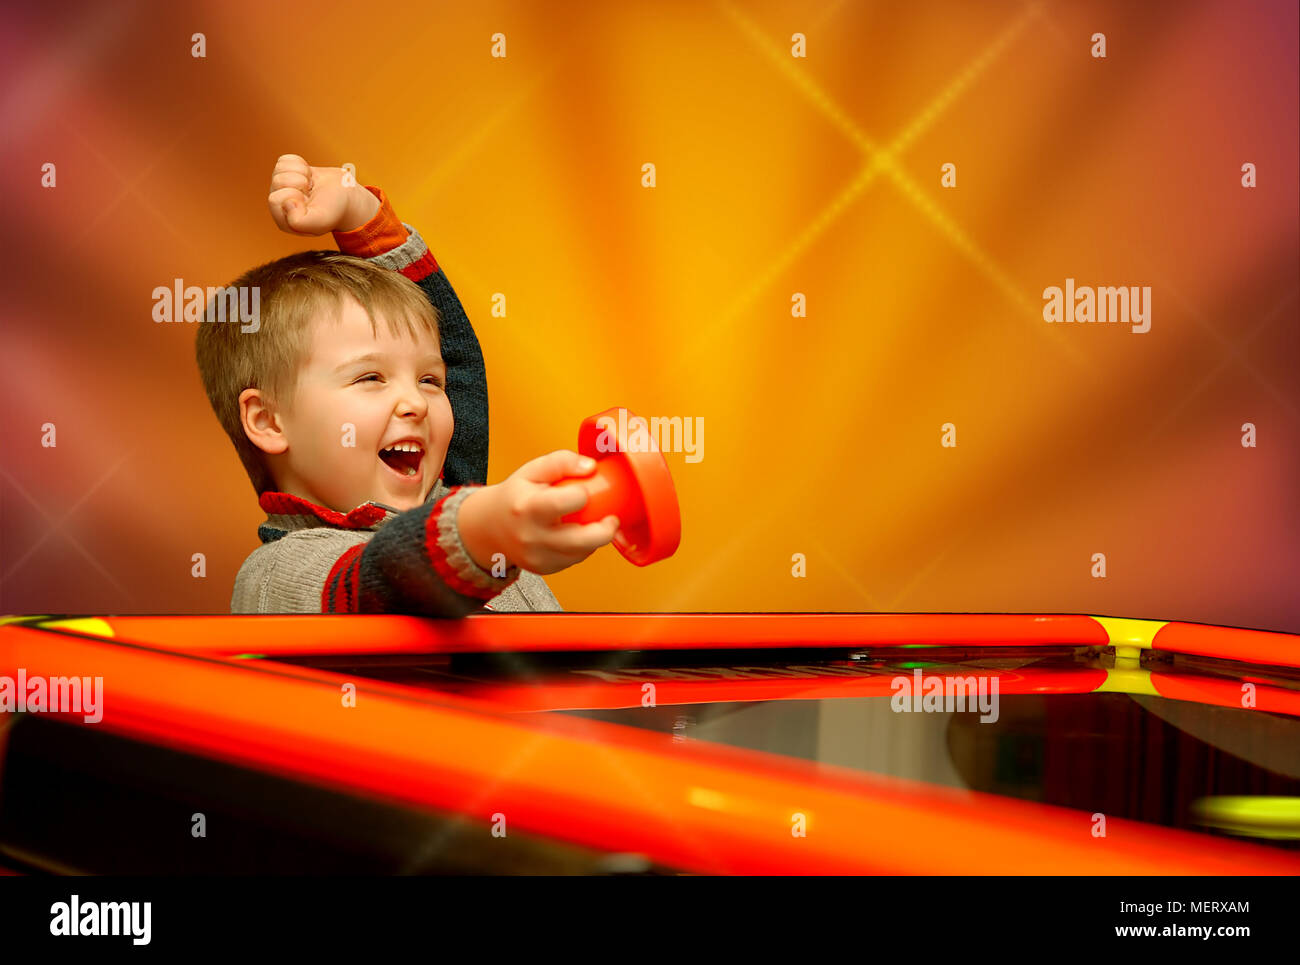 A child who has won his air hockey game, with a red mallet in his hand. Stock Photo